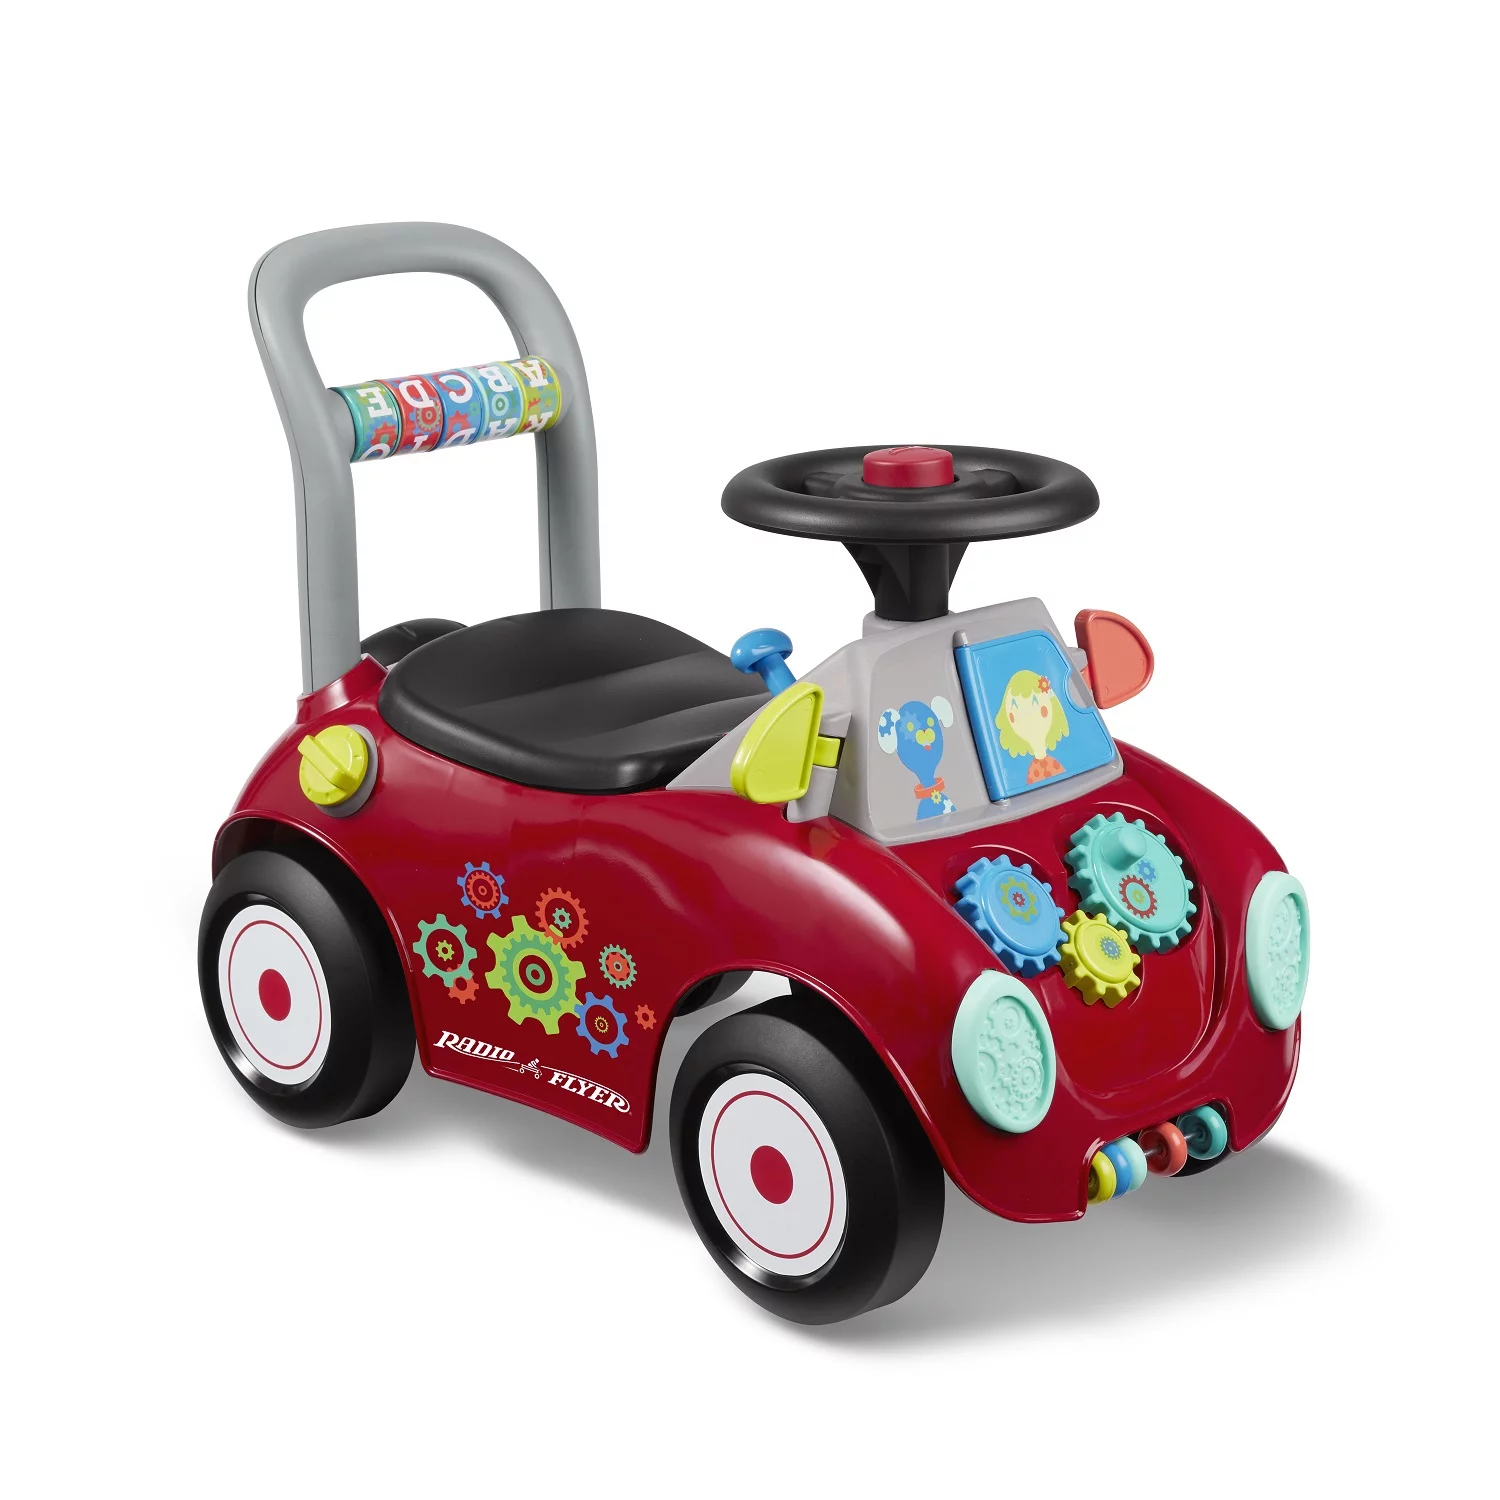 Radio Flyer, Busy Buggy, Ride-on and Push Walker, Multi-color